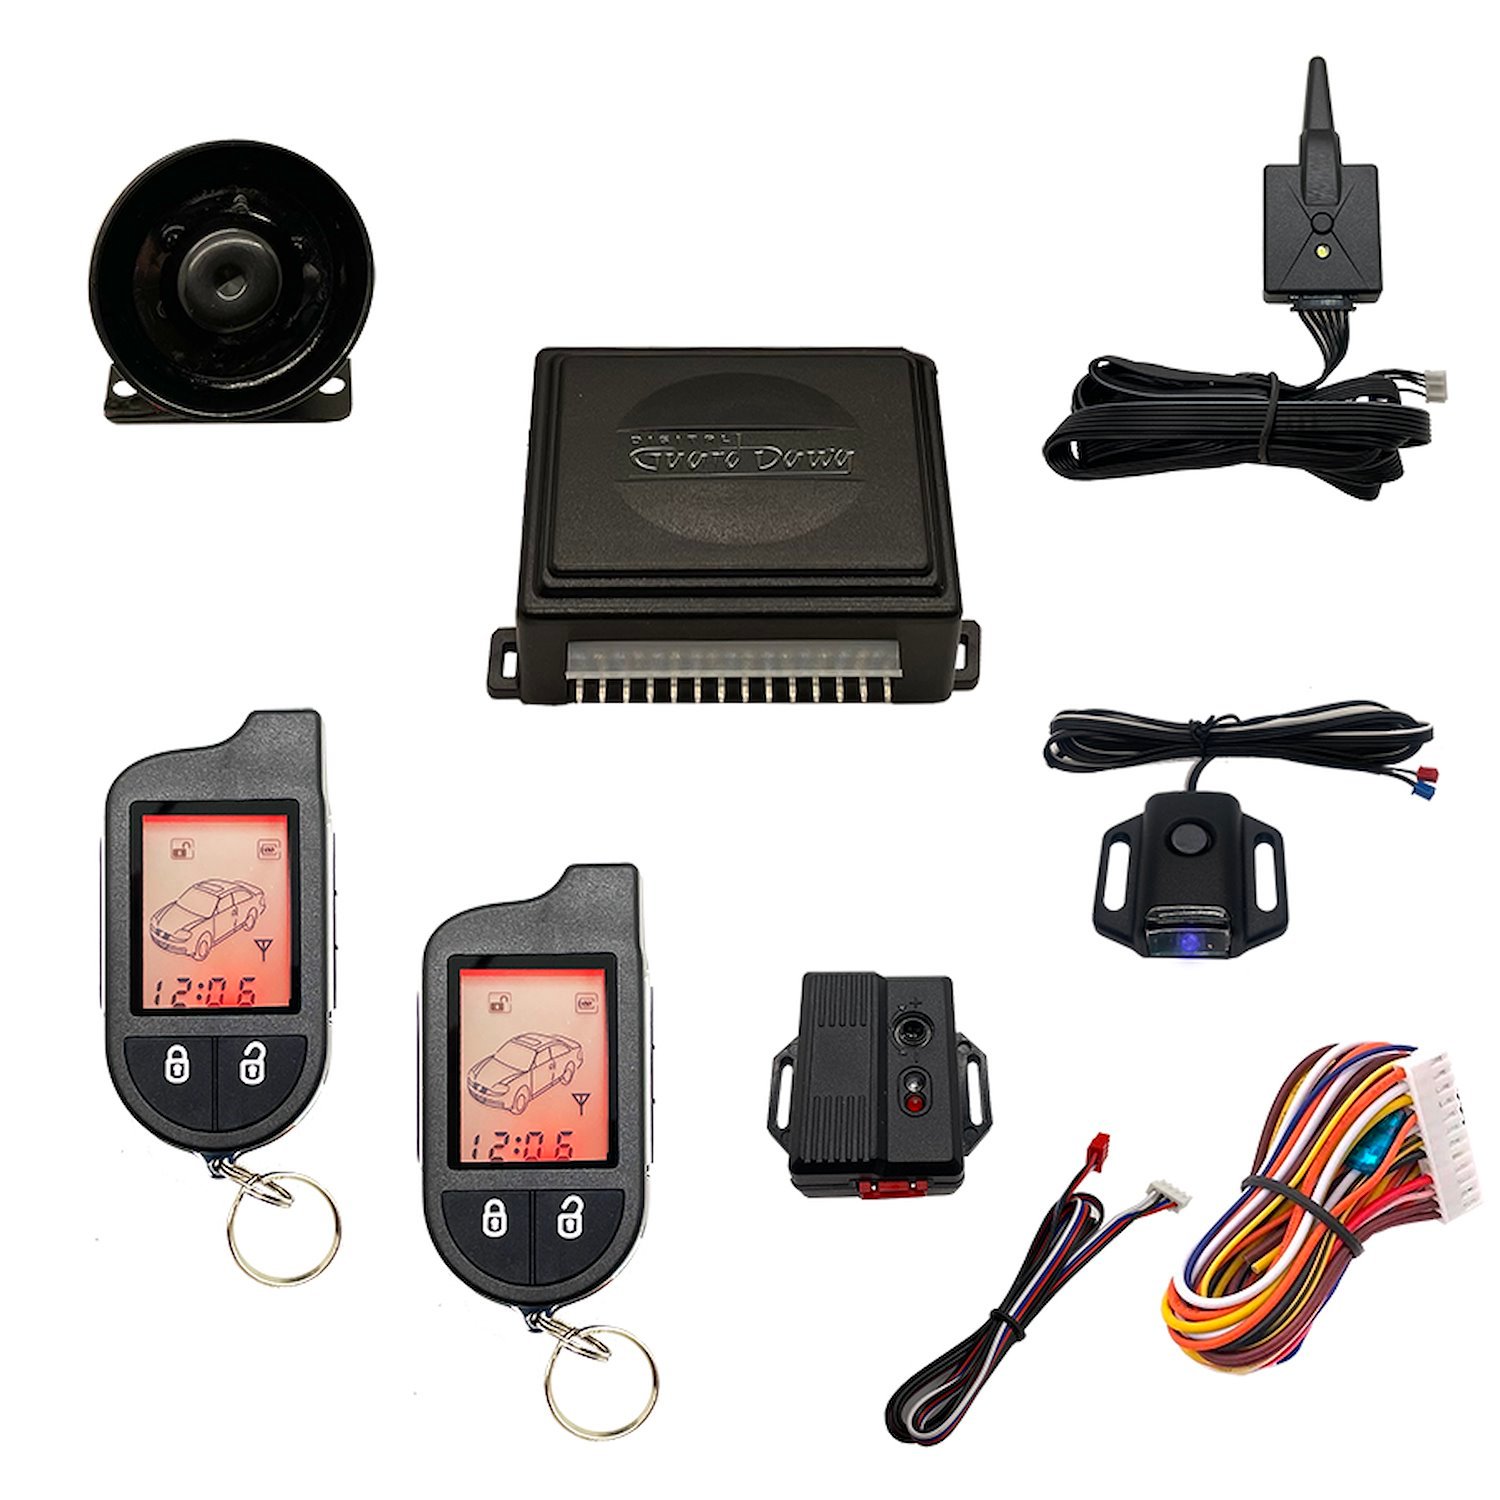 DGD-KY-ALM-2 Remote Keyless Entry and Alarm System, 2-Way